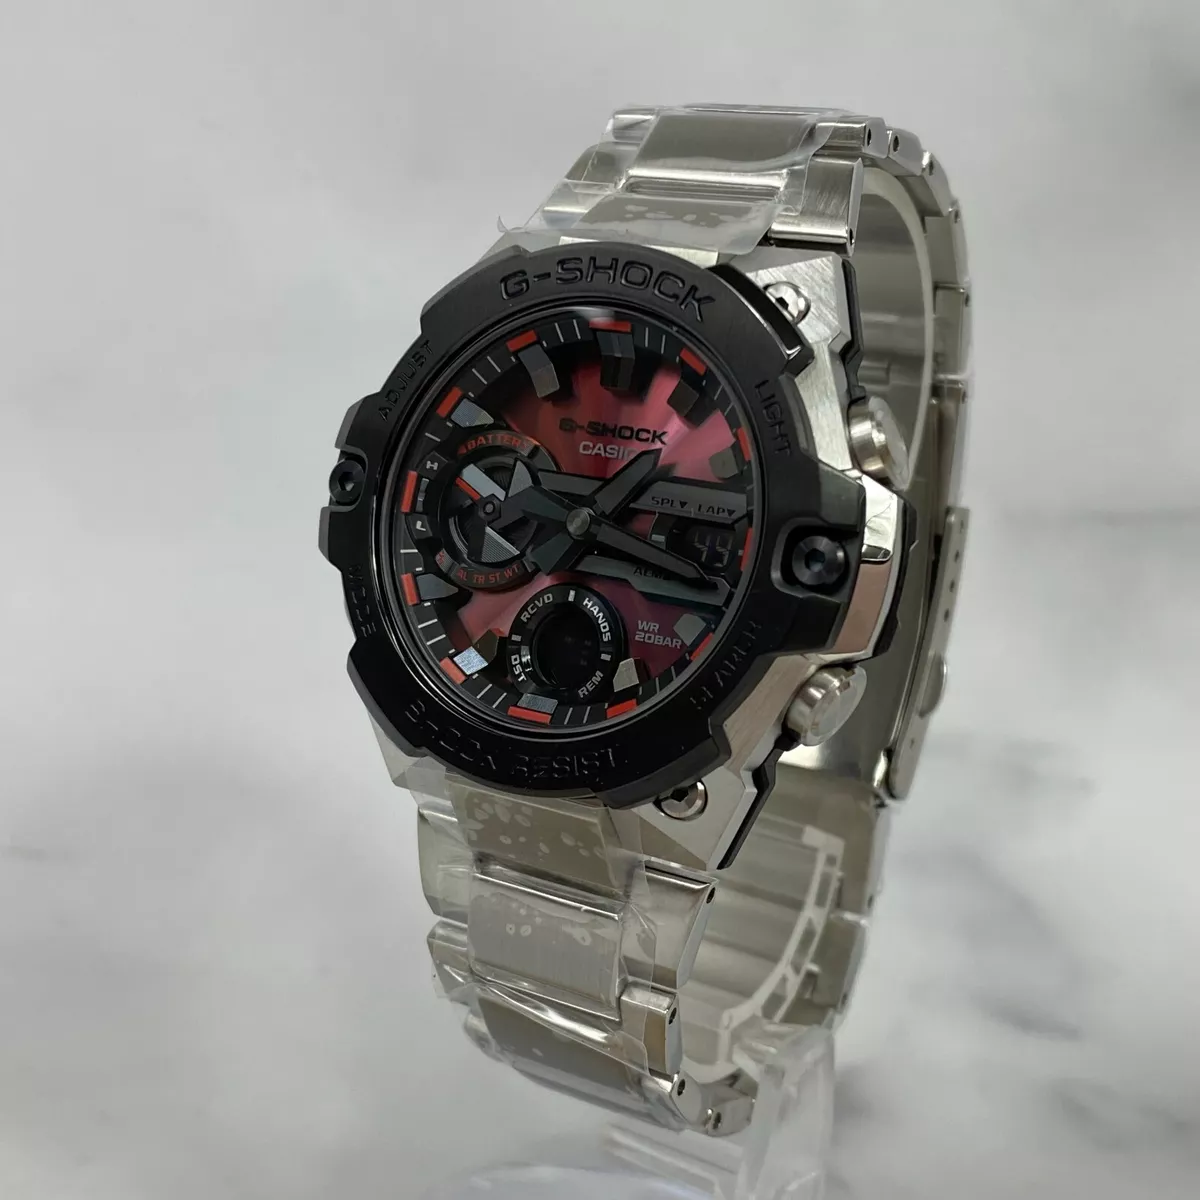 CASIO G-Shock GST-B400AD-1A4 G-Steel Stainless Steel Solar Fire Red Watch  New